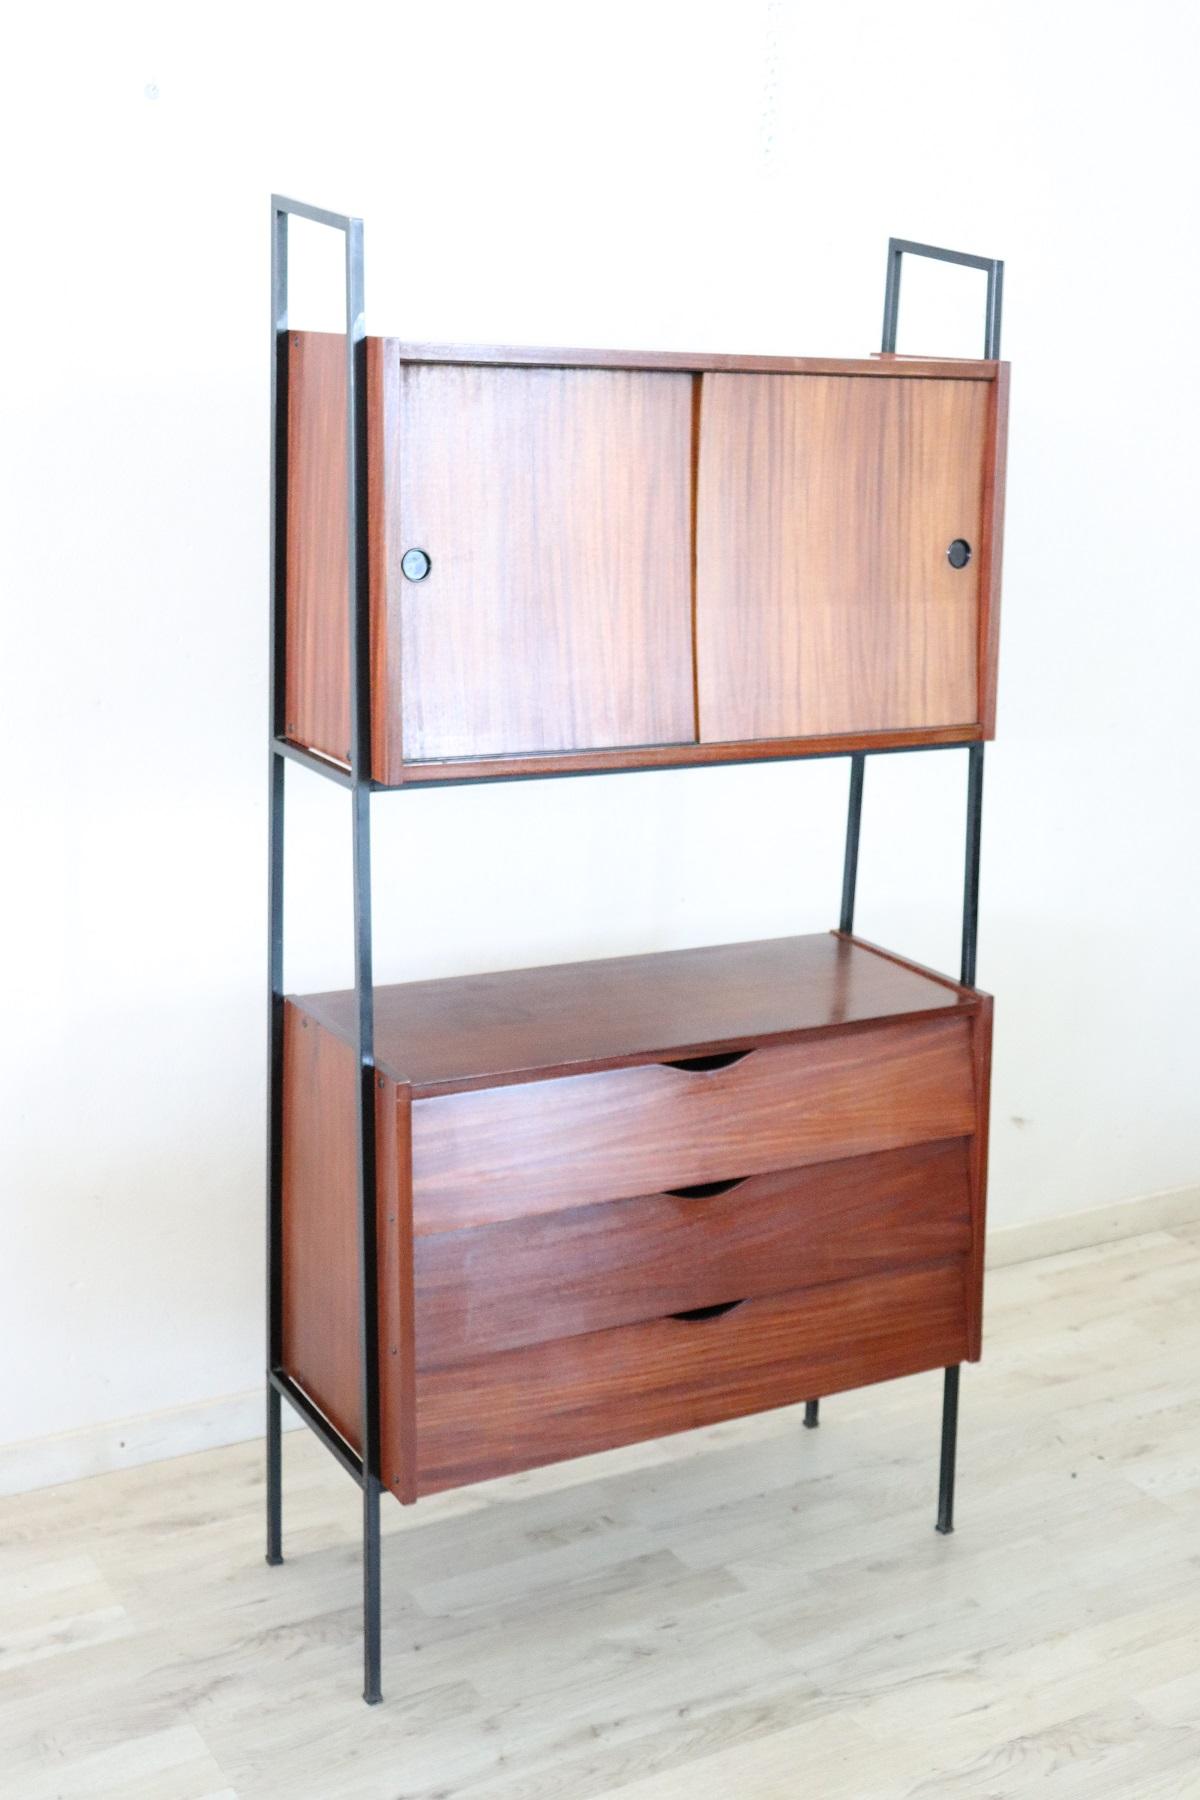 Italian design shoe cabinet 1960s. This Italian design furniture is made of teak wood. Great quality Italian design furniture perfect for a modern home. Perfect for decorating an entrance. This item will be shipped unassembled assembly is not